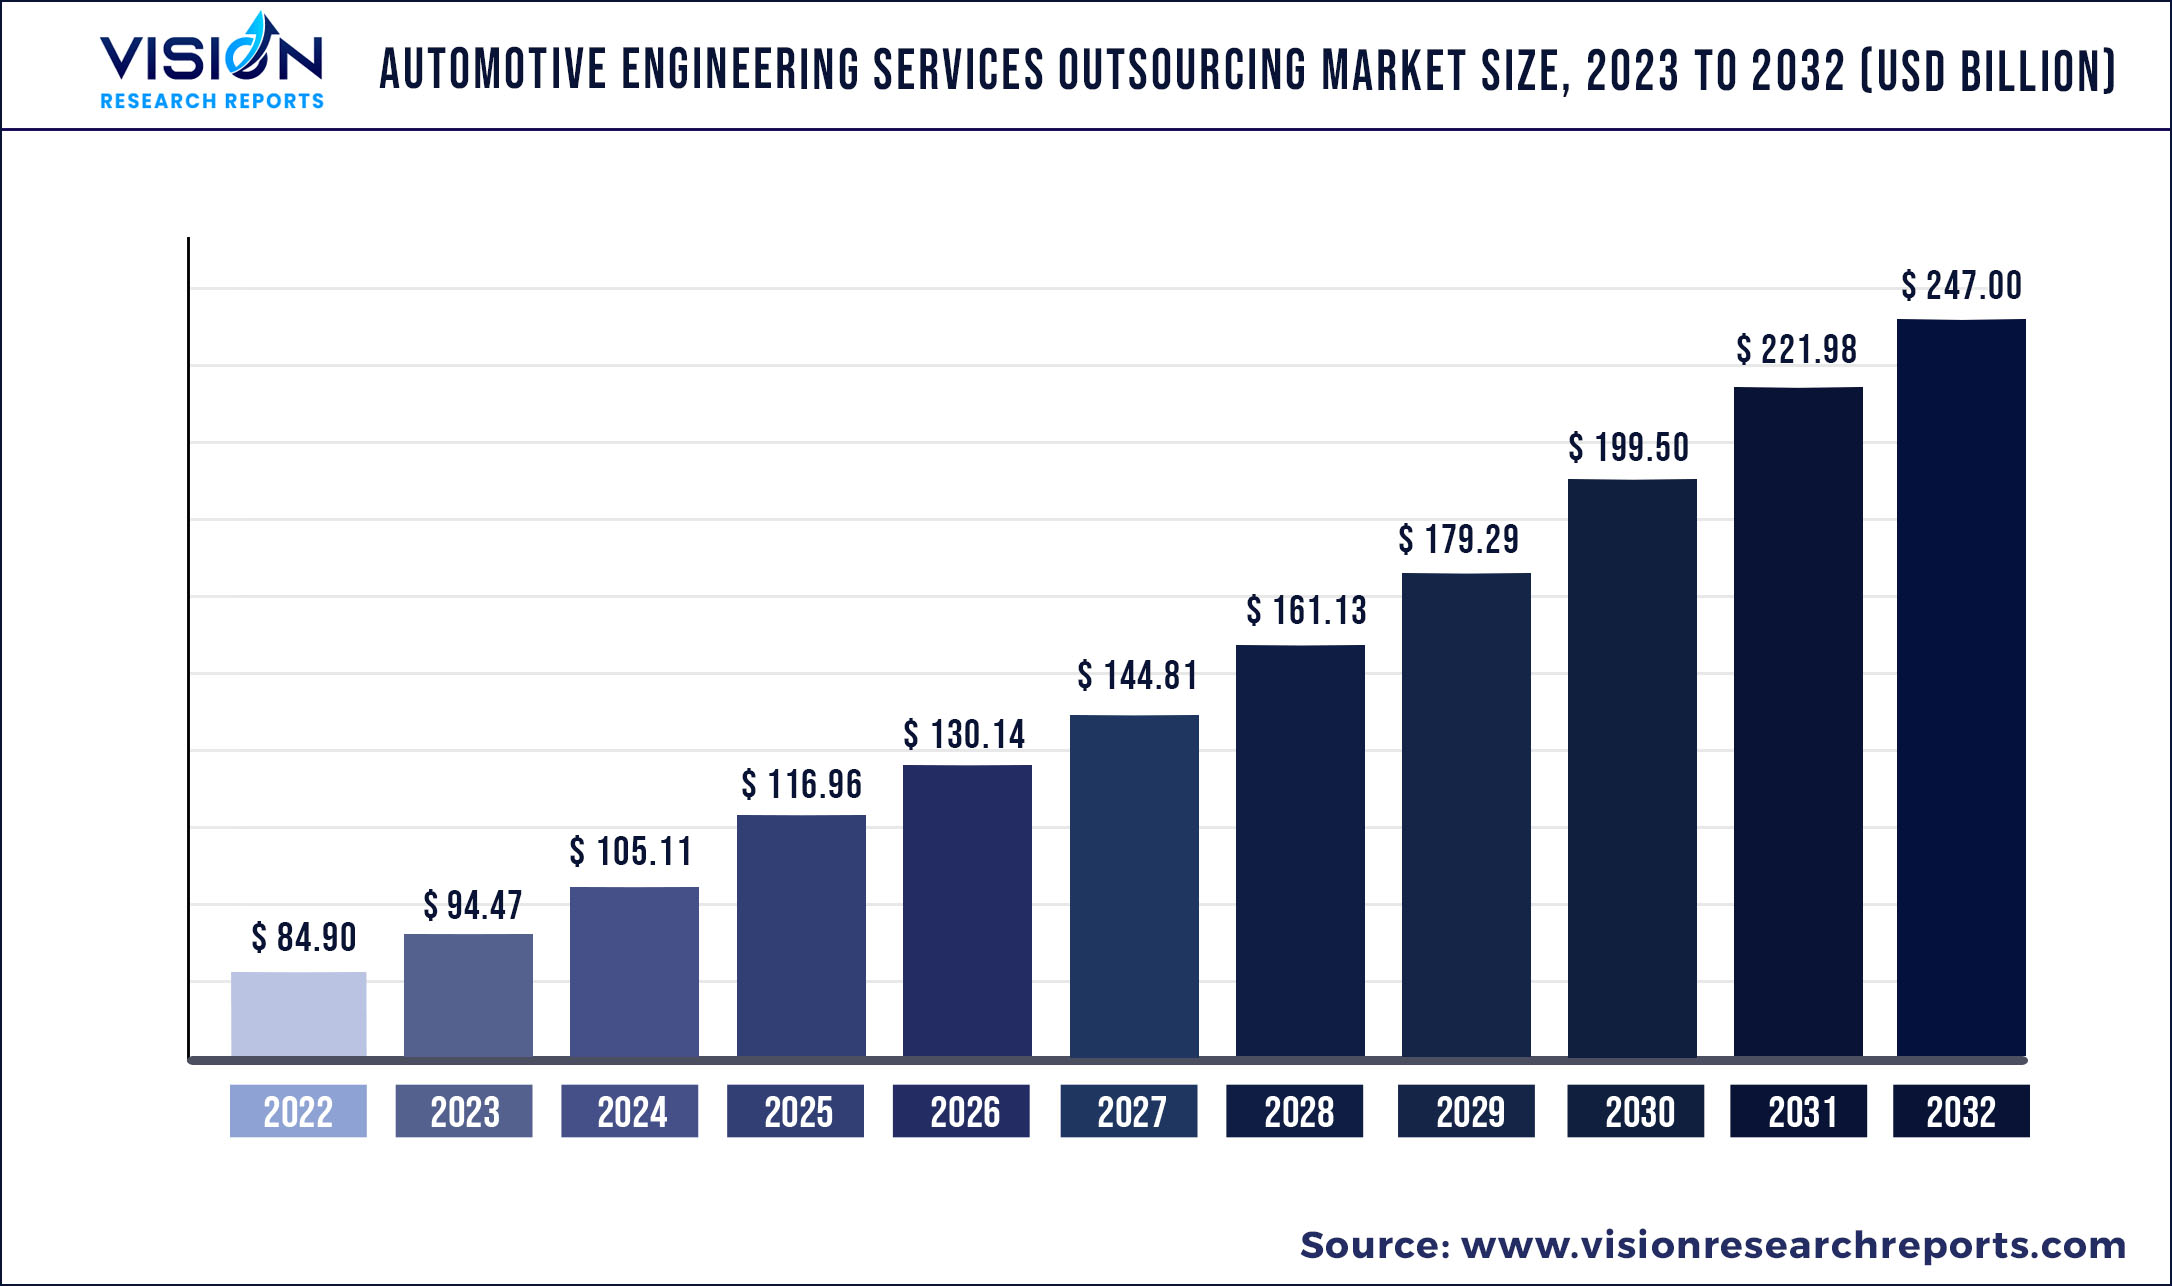 Automotive Engineering Services Outsourcing Market Size 2023 to 2032